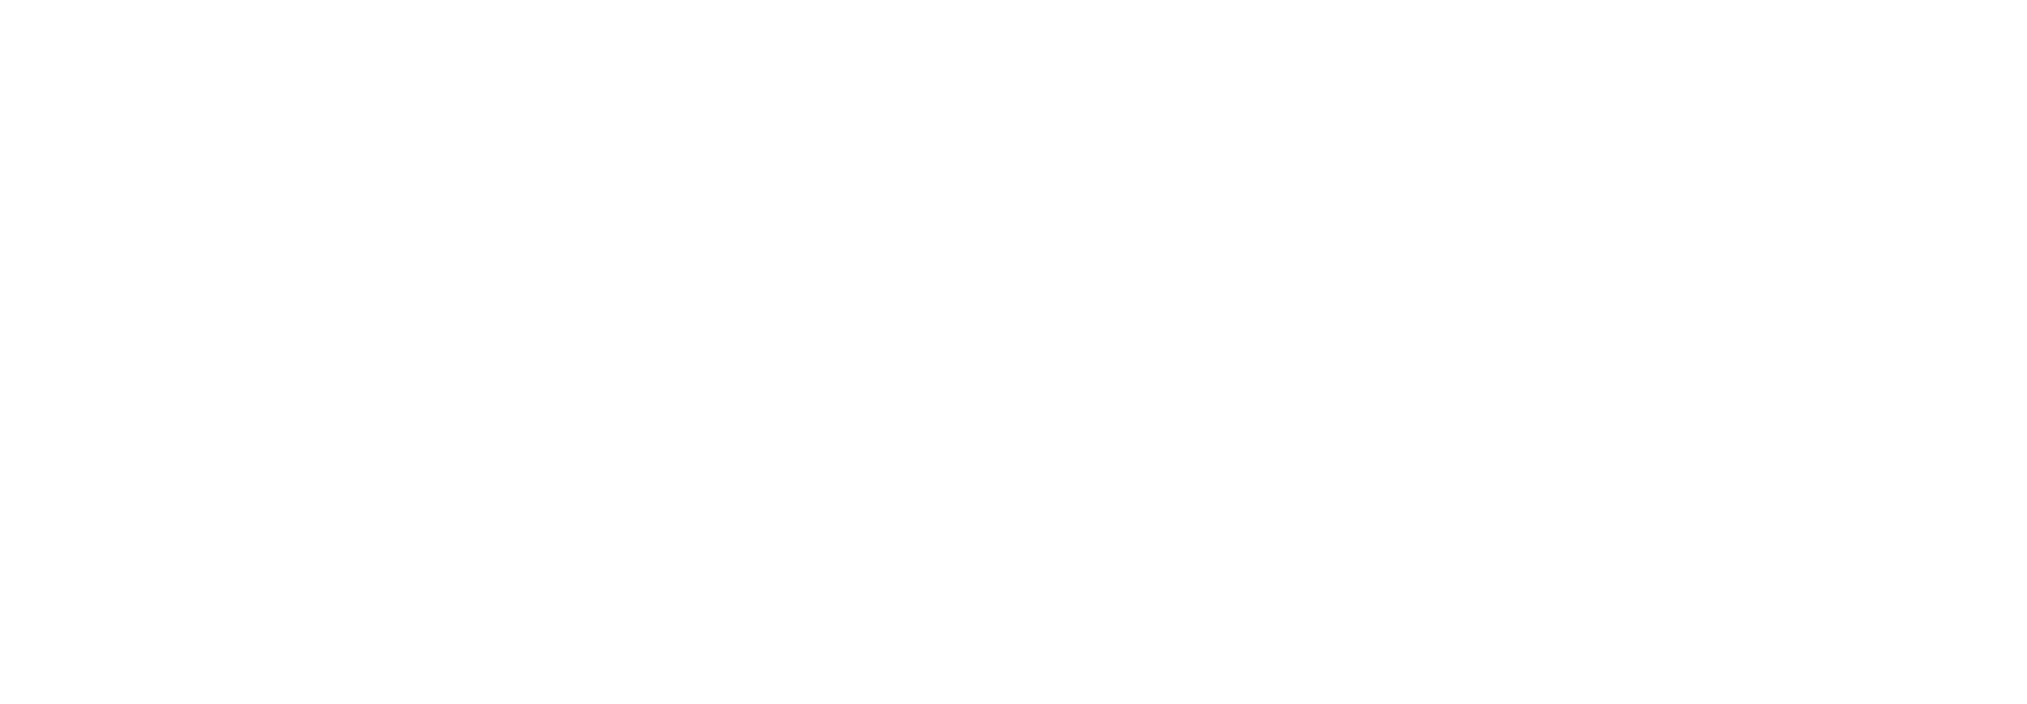 dei-logo, click to visit the Division for Equity and Inclusion site